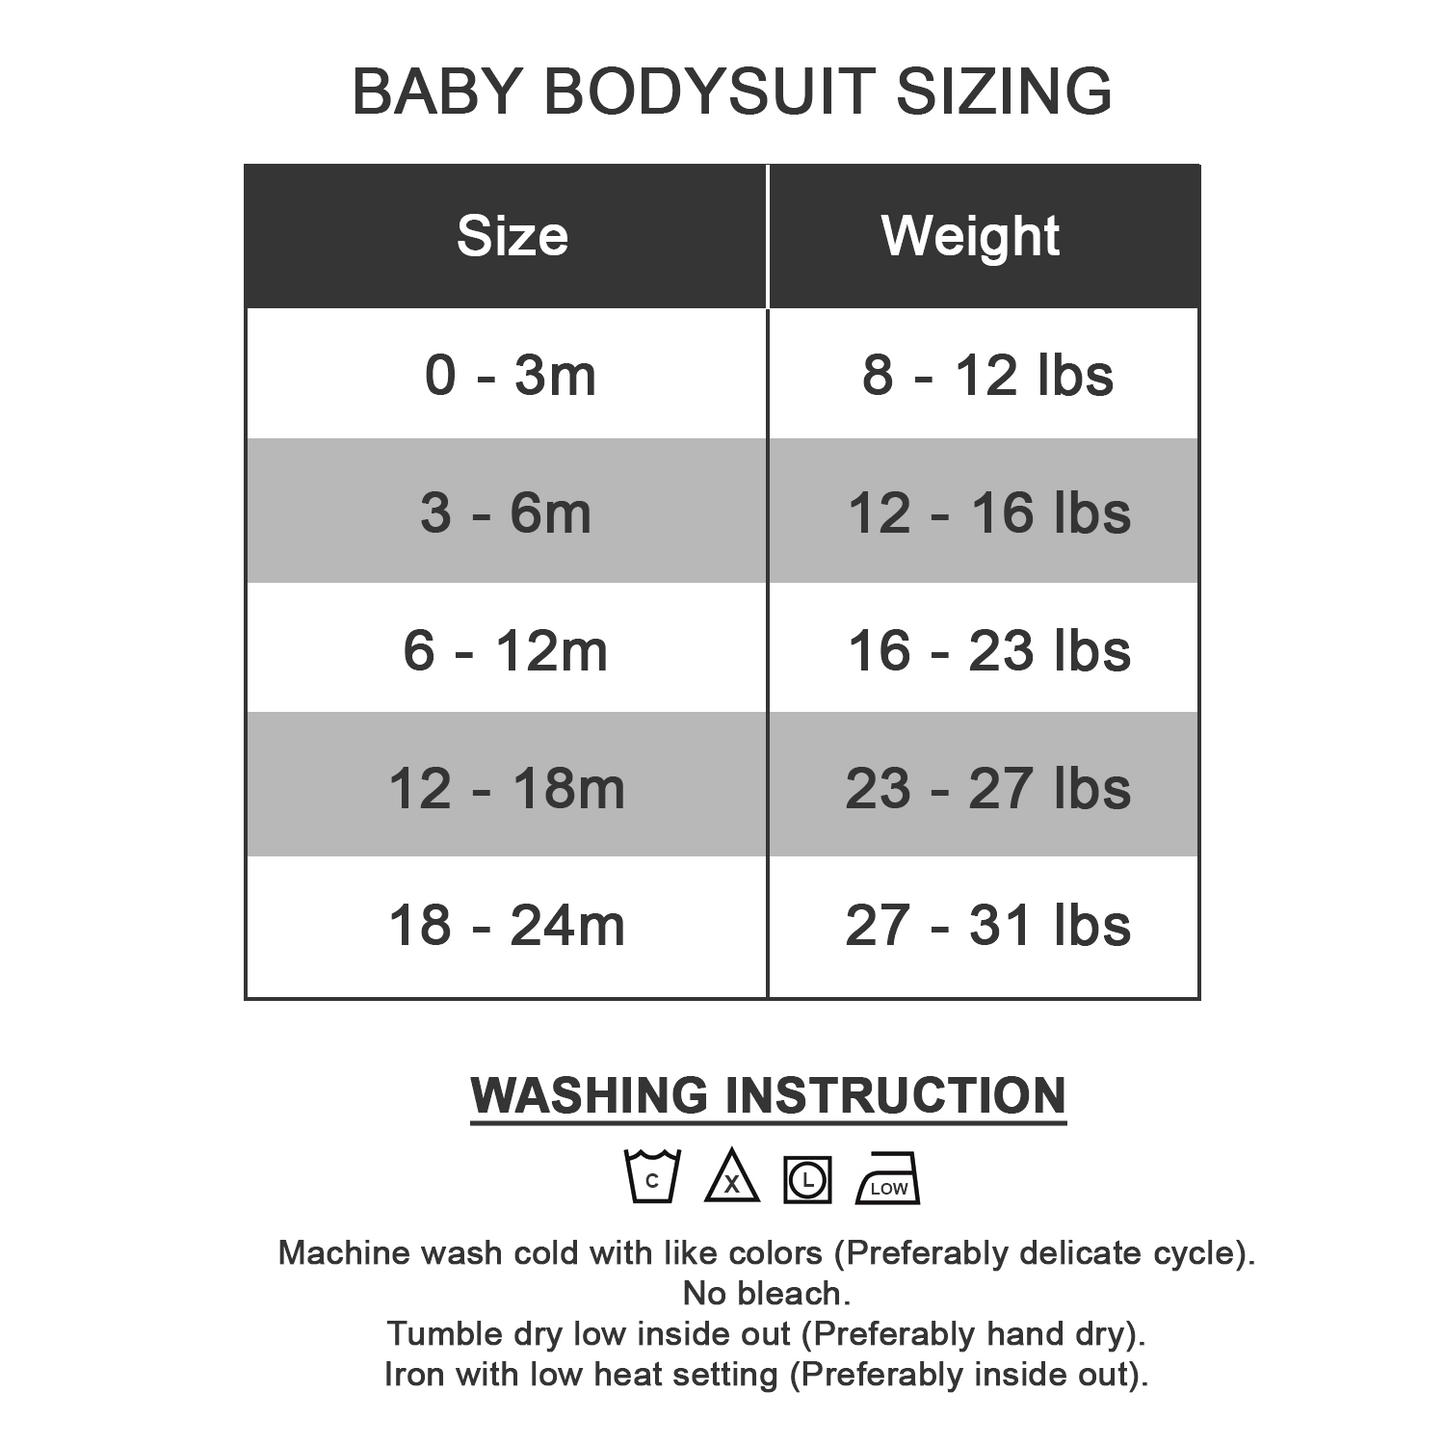 [Personalized] Endanzoo Organic Baby Bodysuit - Made in Canada